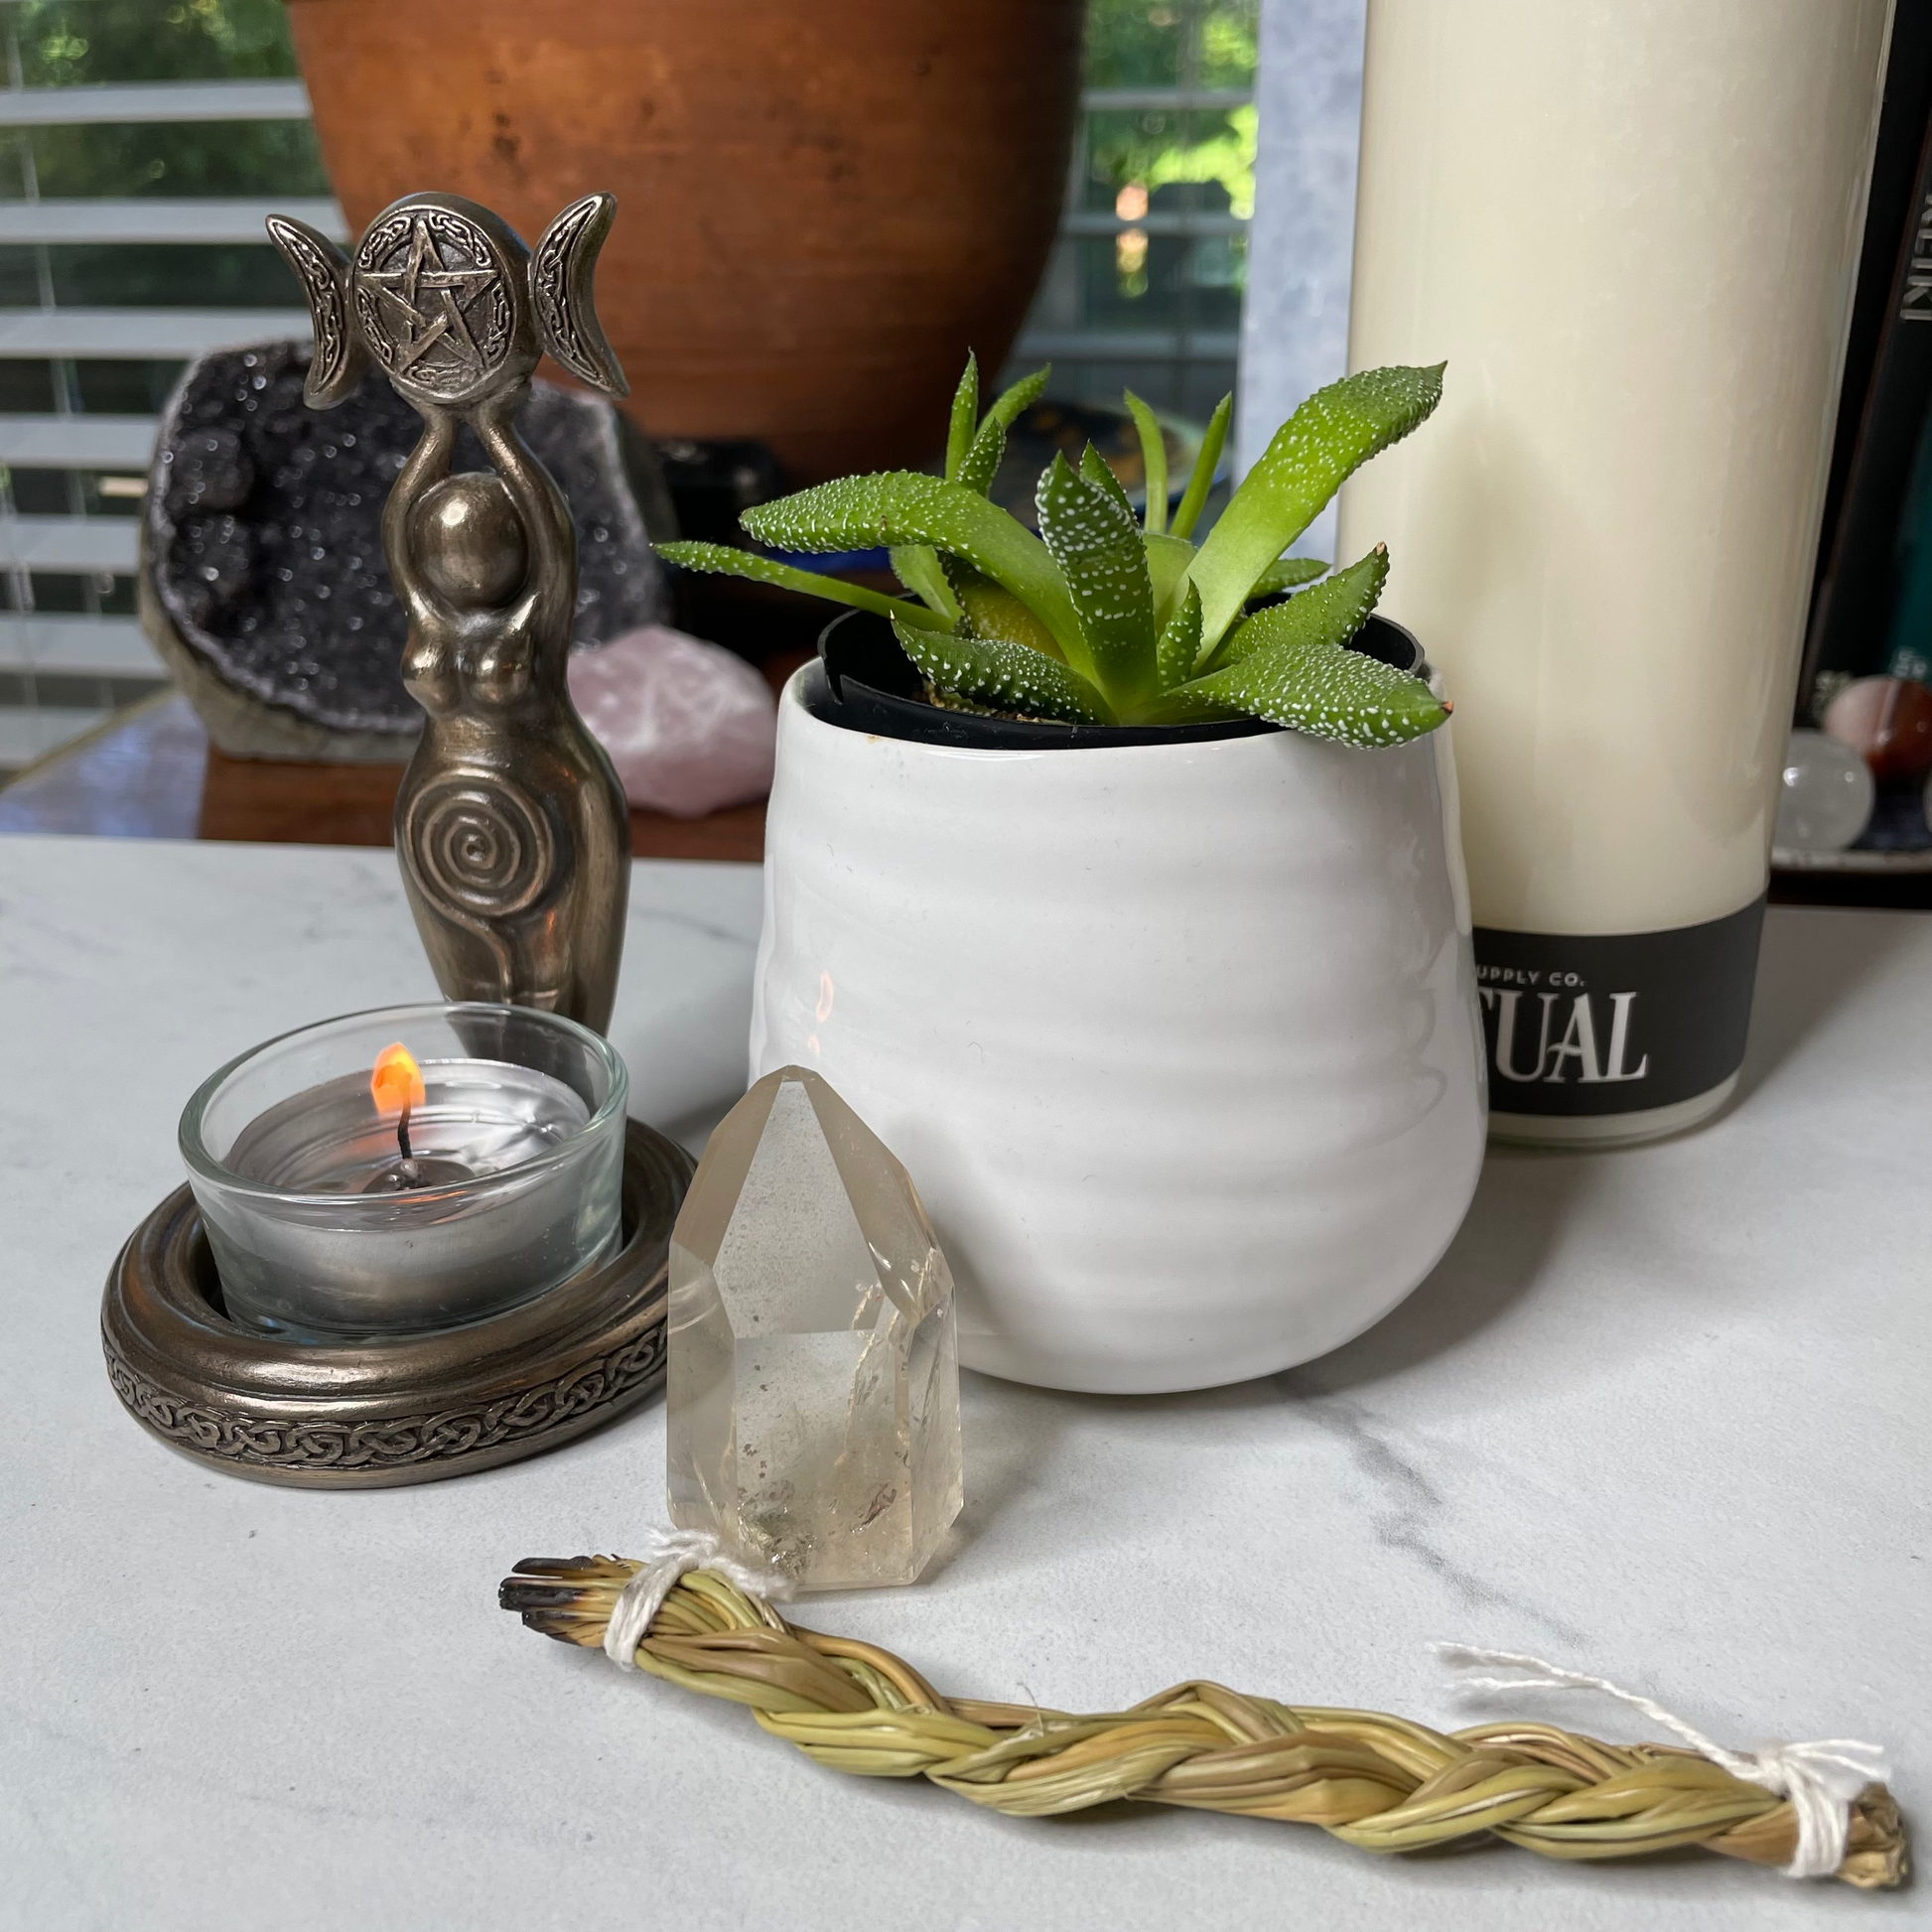 Freya's Haven | Metaphysical & Crystal shop | A pale yellow stone called Citrine has been polished into a standing point. It is displayed with a succulent in a white pot, a goddess tea light candle holder with lit candle and a braid of sweet grass on a white marble tile. there are other crystals, a plant and books in the background.